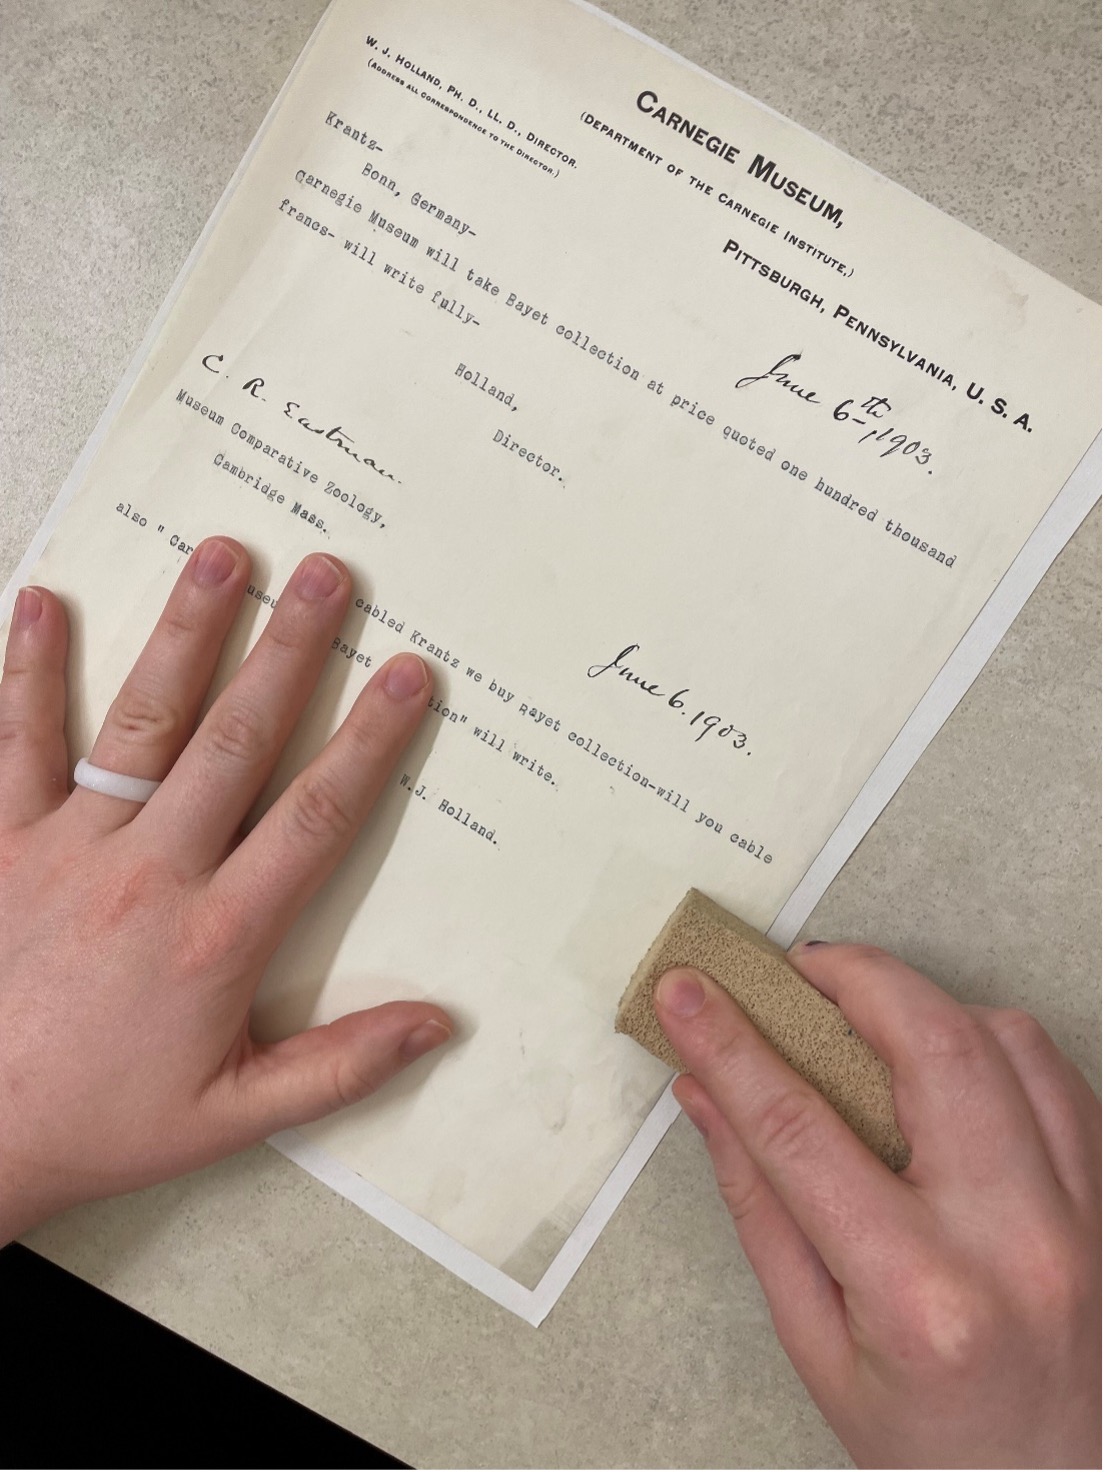 historic document being cleaned by hand with a vulcanized rubber sponge